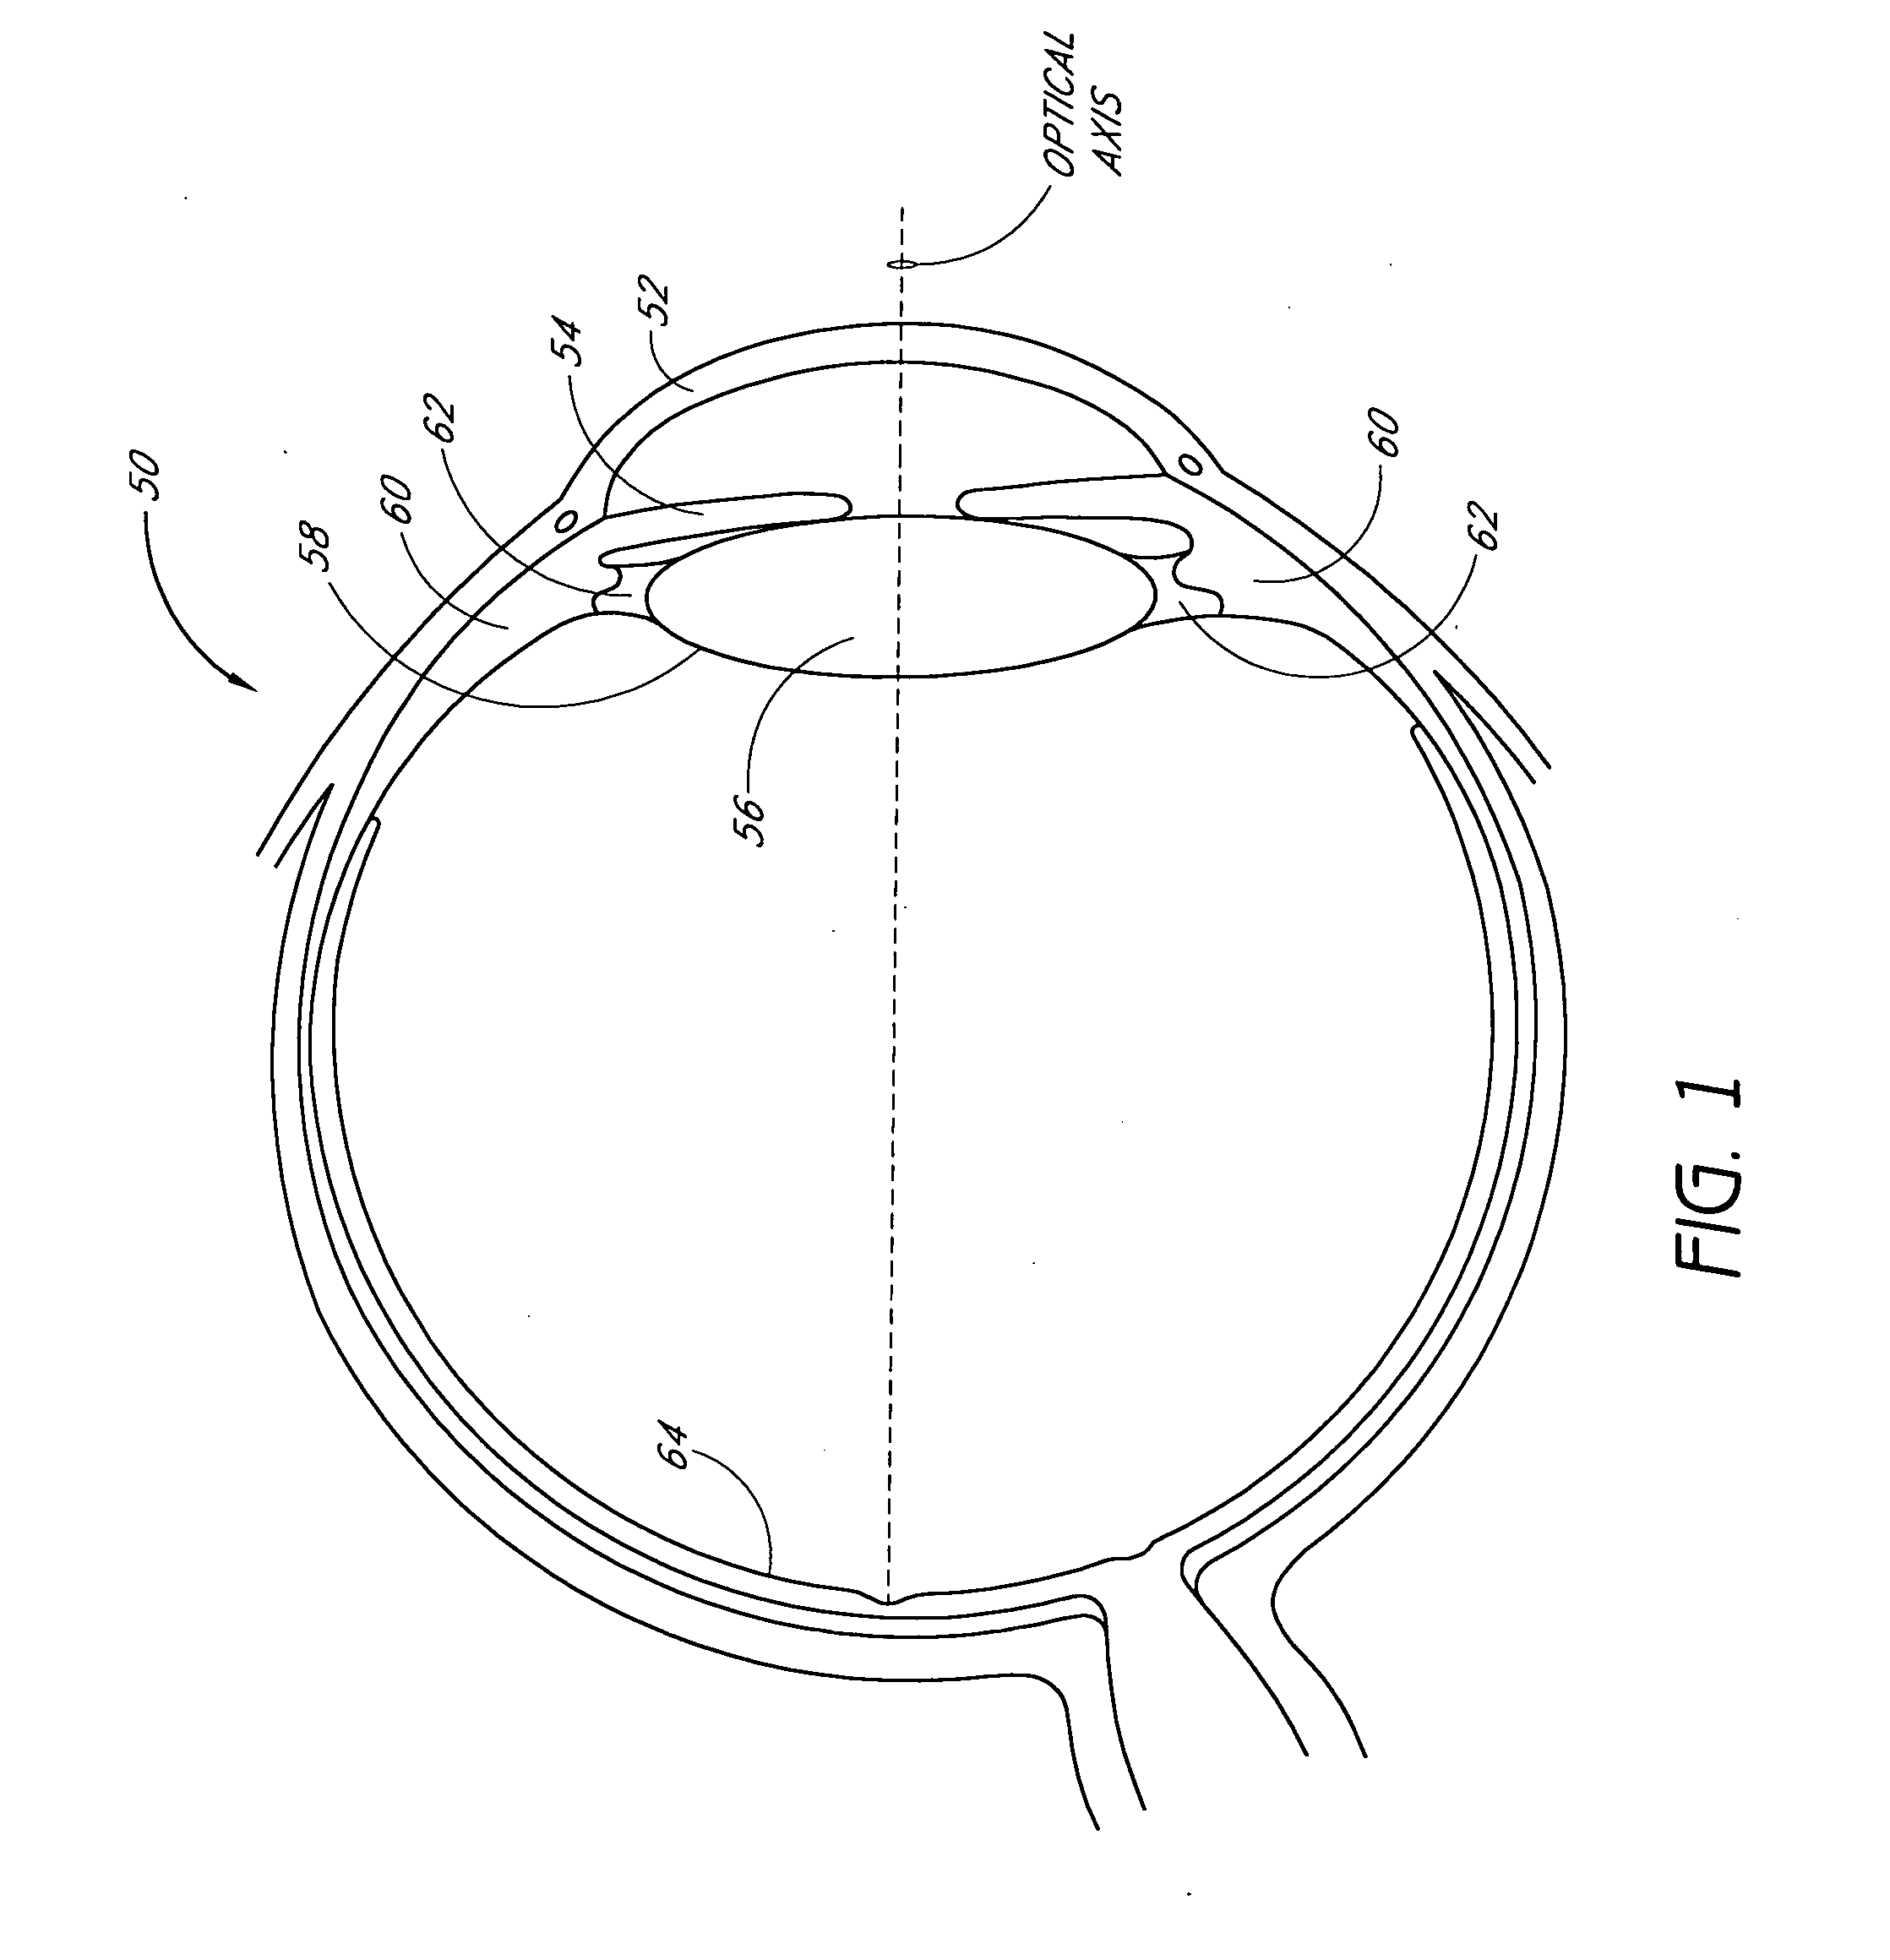 Accommodating diffractive intraocular lens